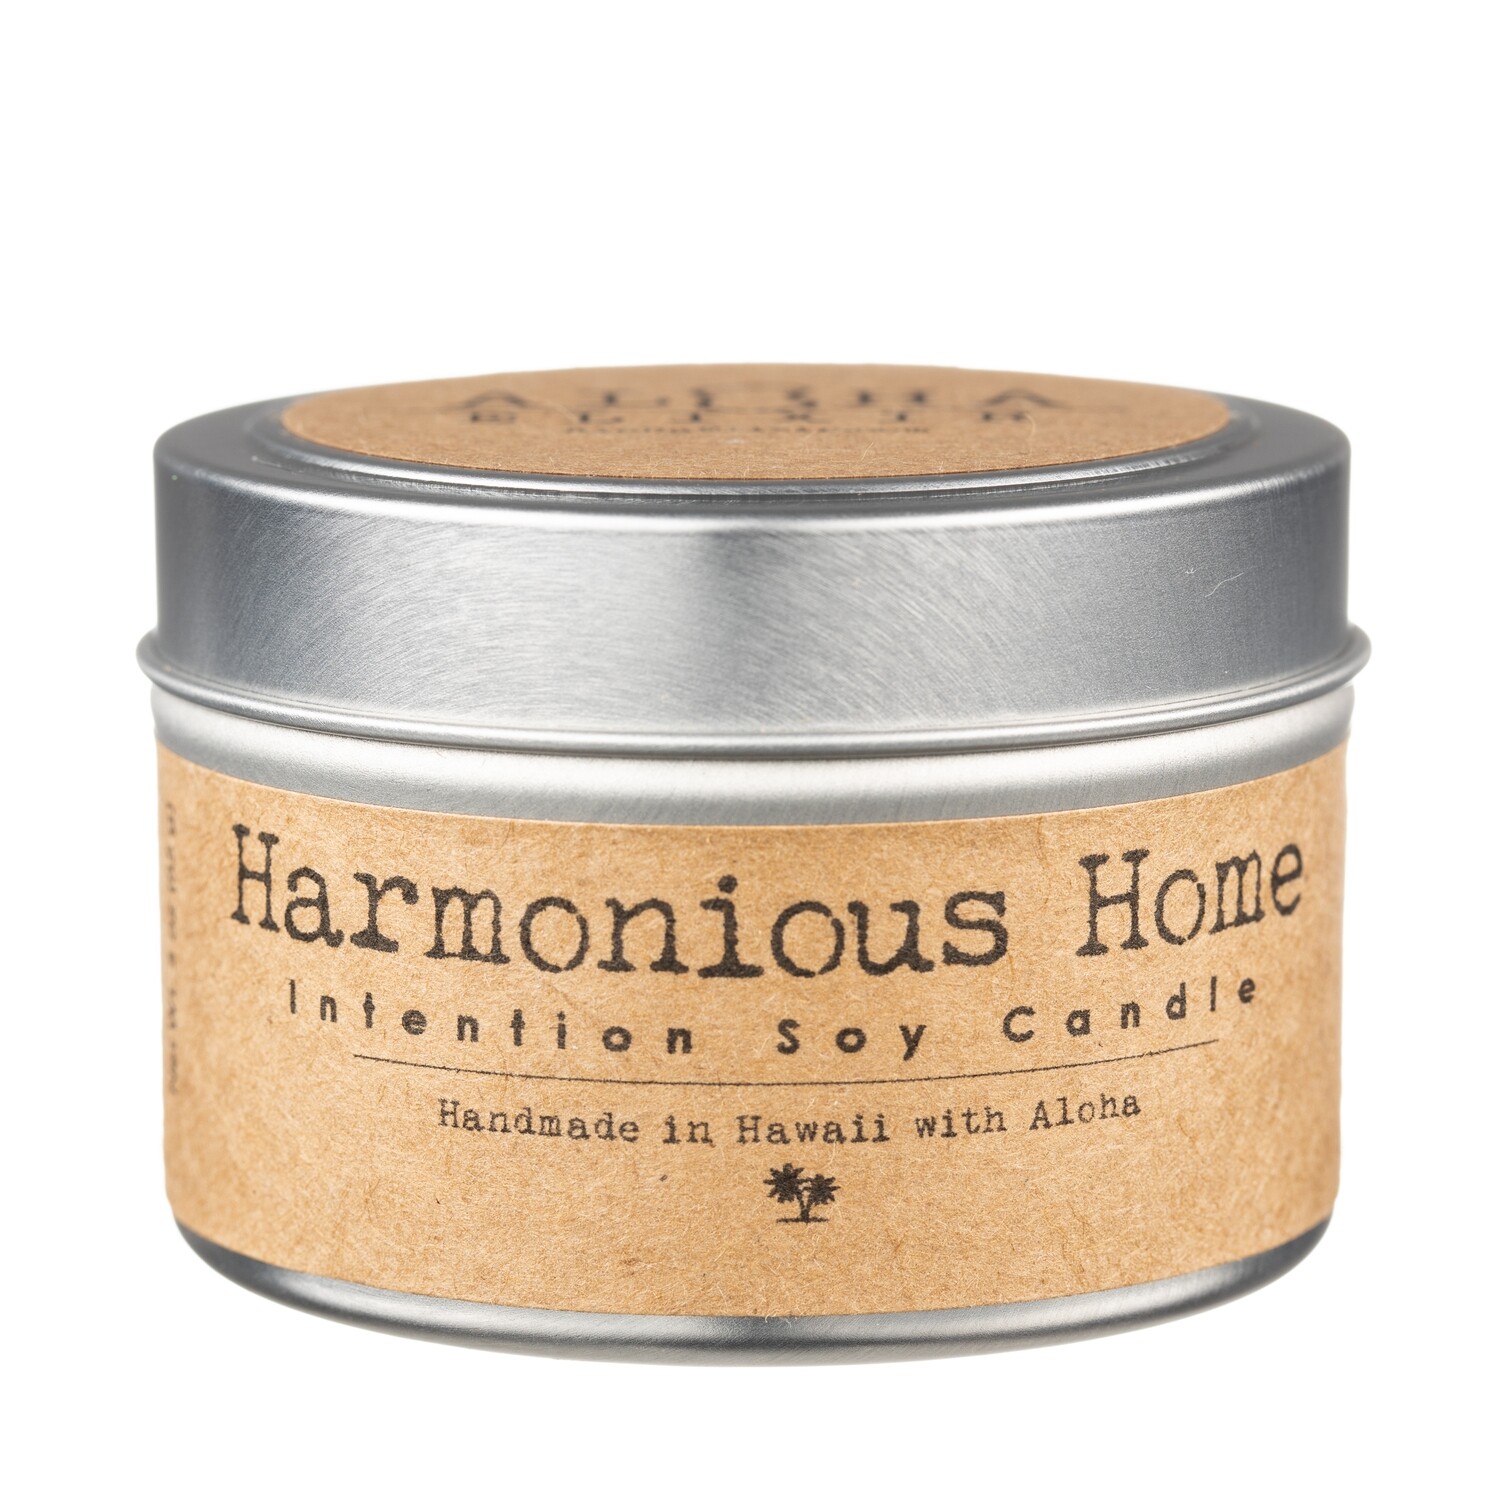 Harmonious Home Soy Intention Candle